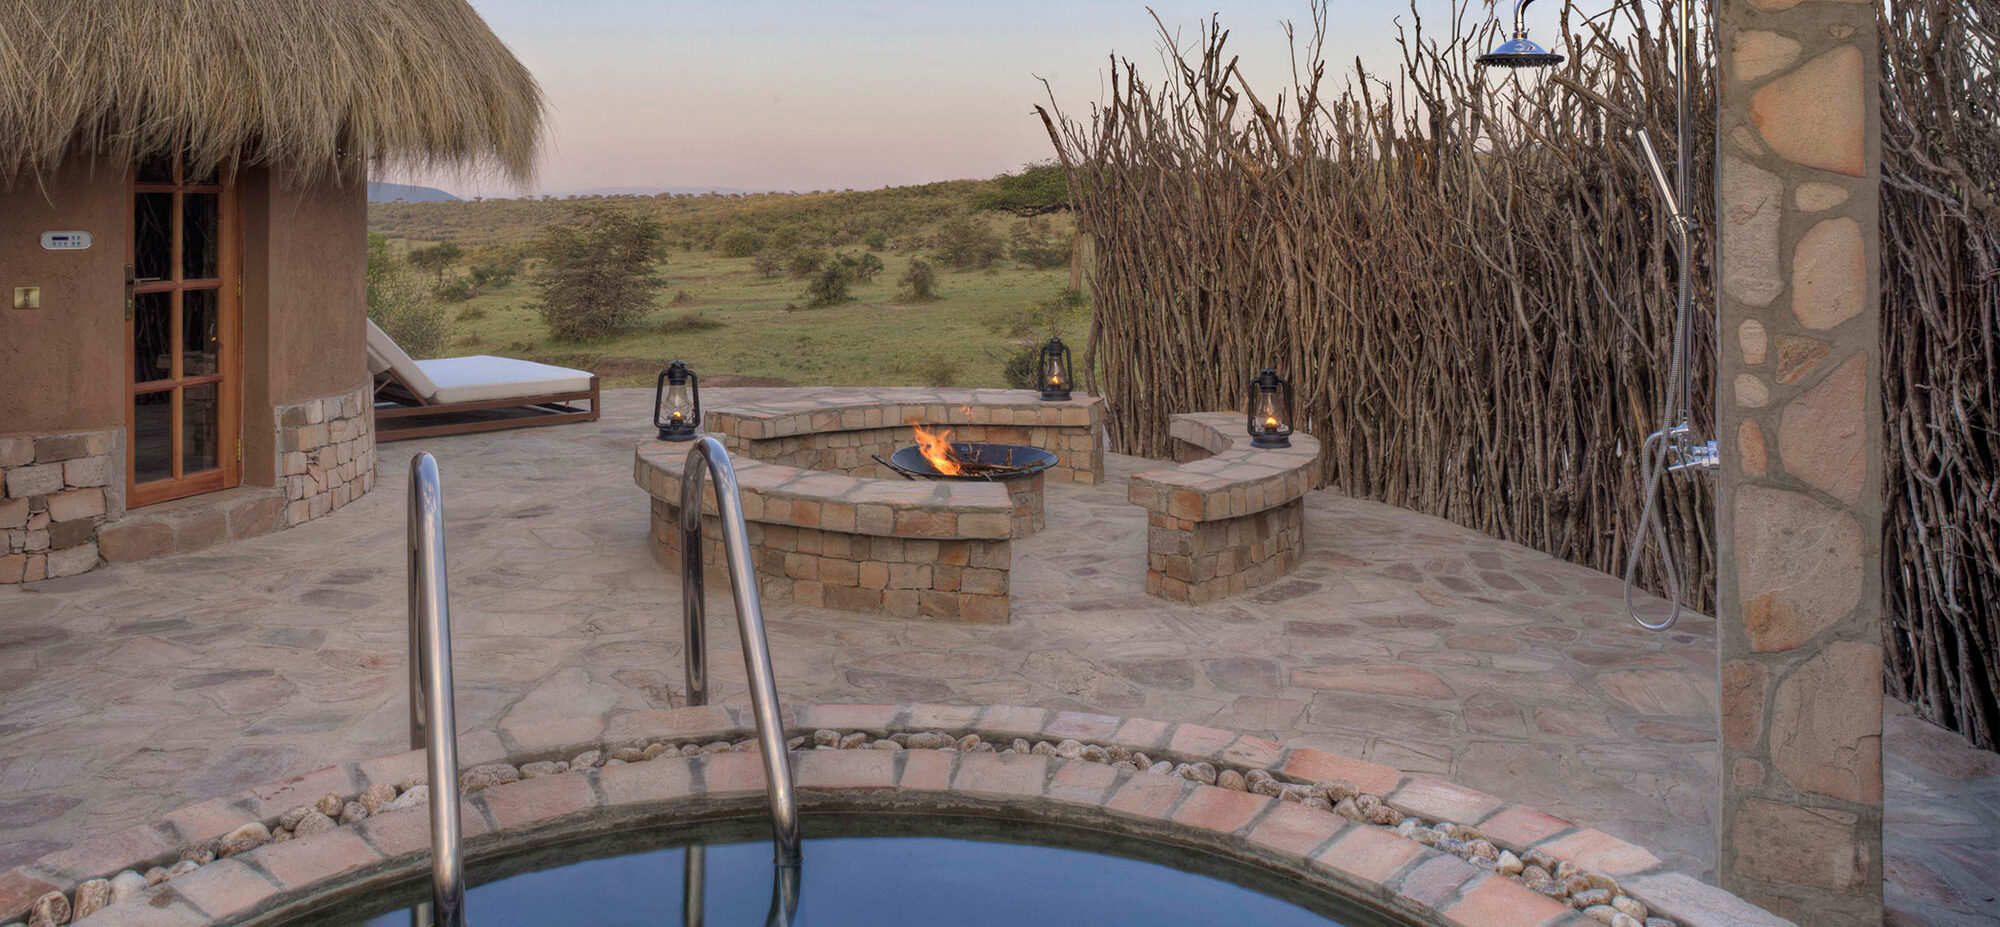 Fire pit burning beside the plunge pool